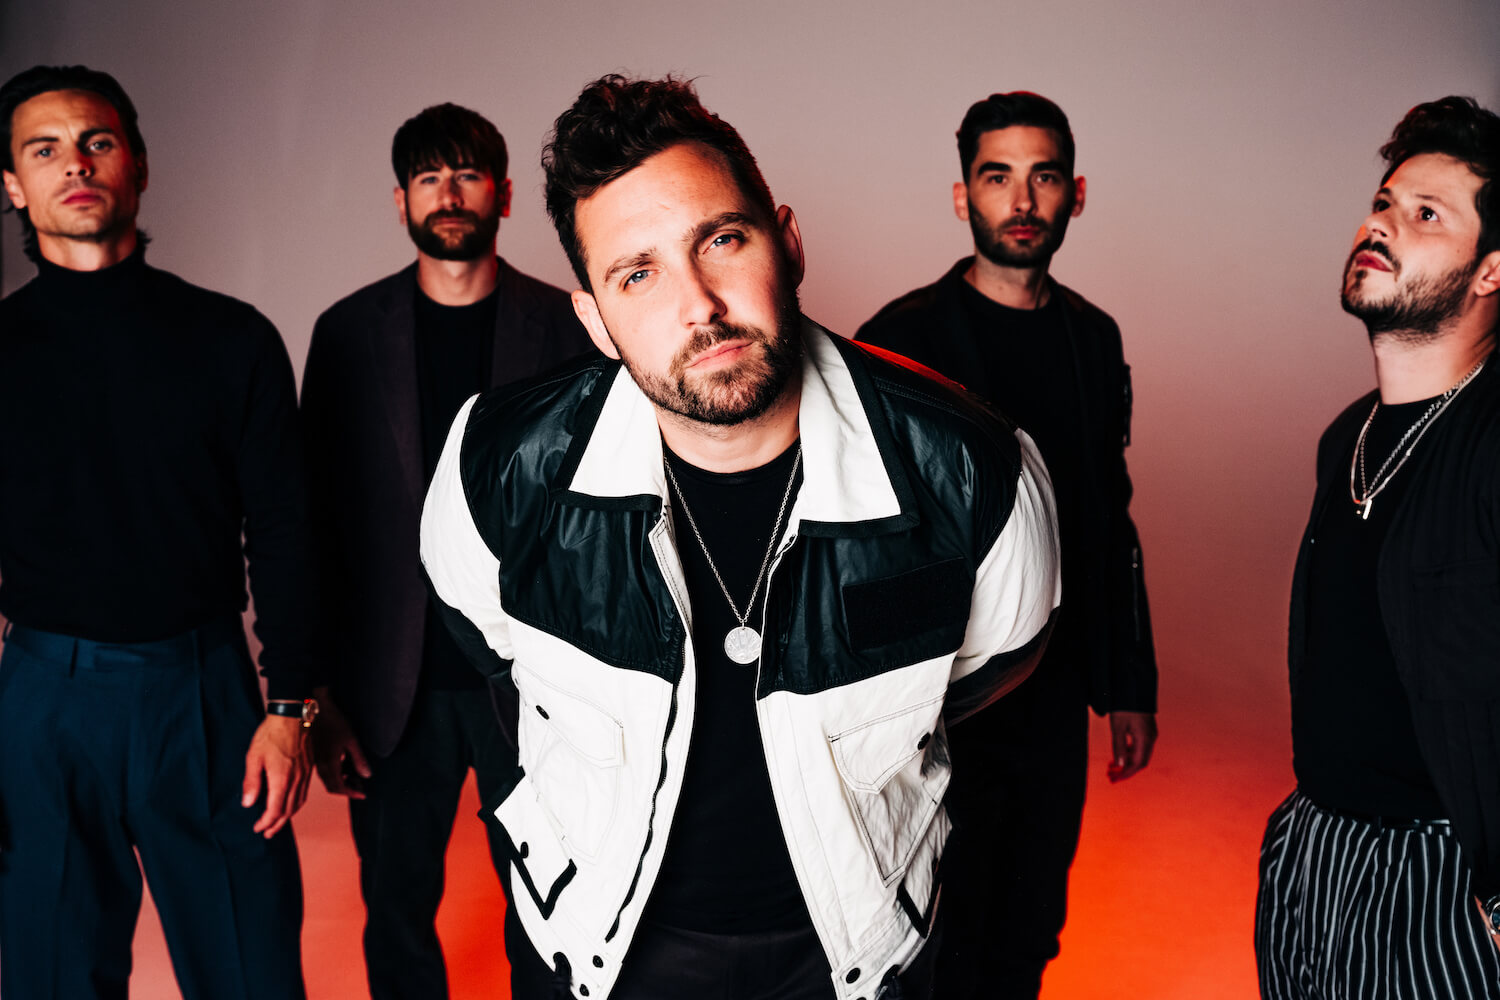 YOU ME AT SIX RELEASE NEW SINGLE “ADRENALINE”